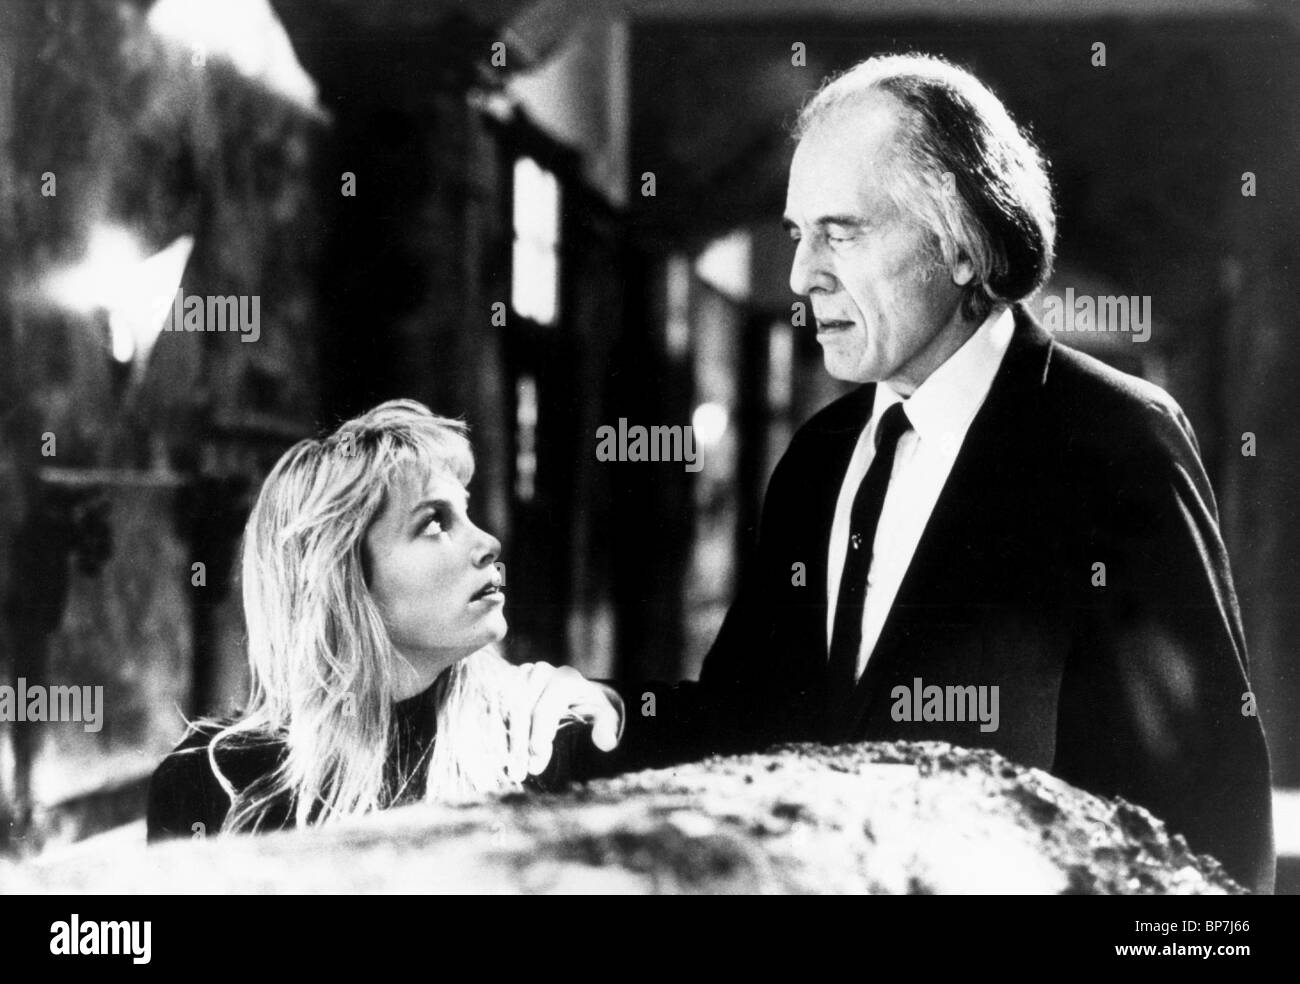 Angus Scrimm High Resolution Stock Photography and Images - Alamy